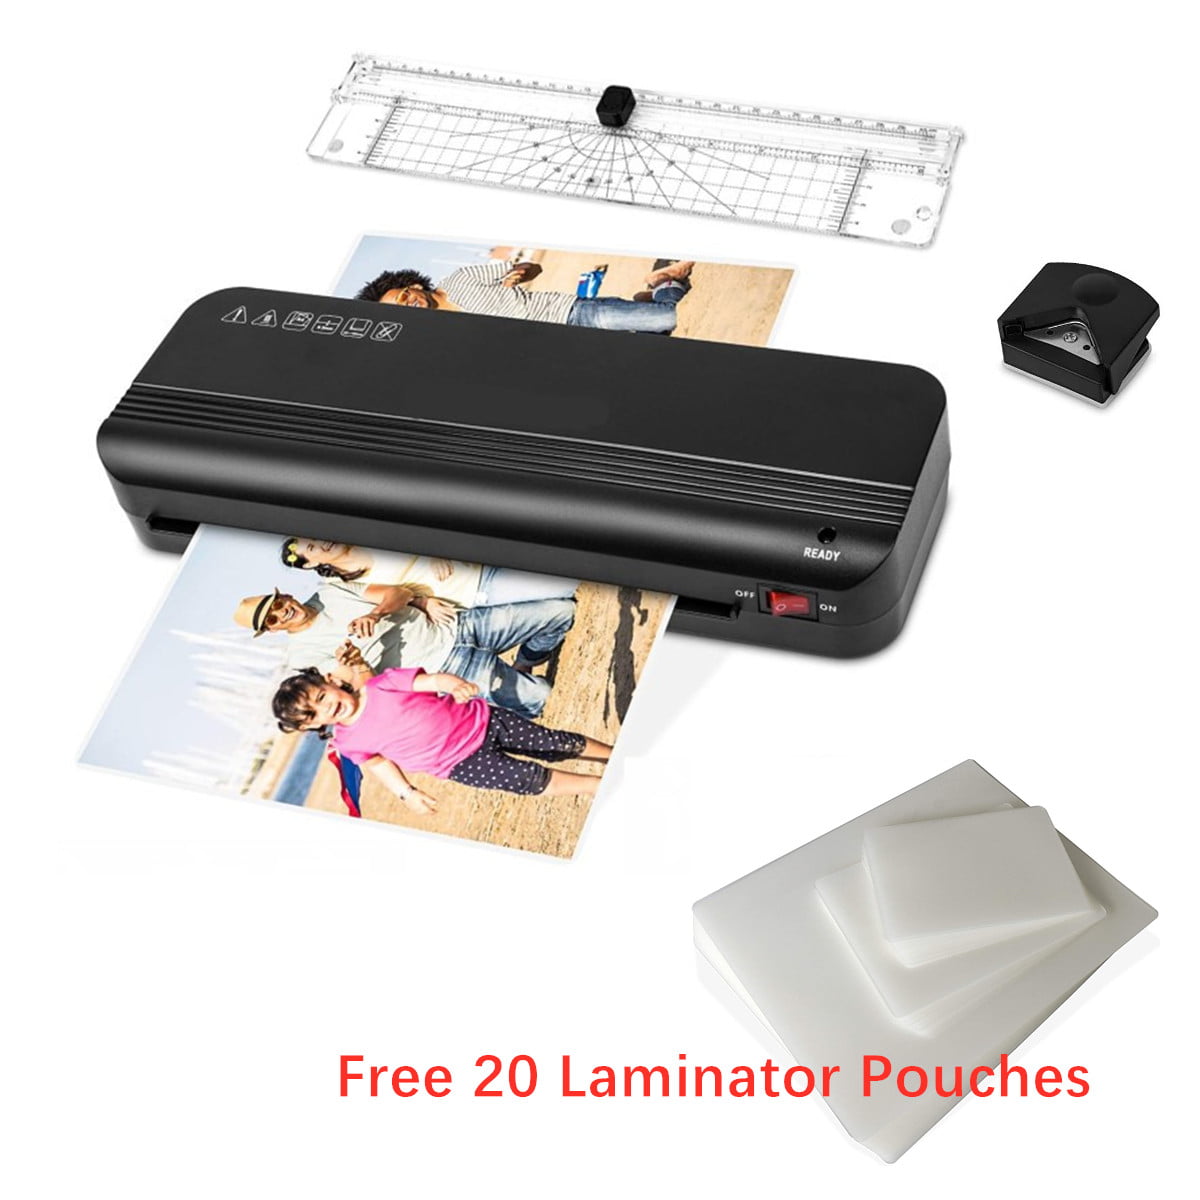 Details about   Scotch Laminator Machine Model TL902 Tested Working Refurbished 